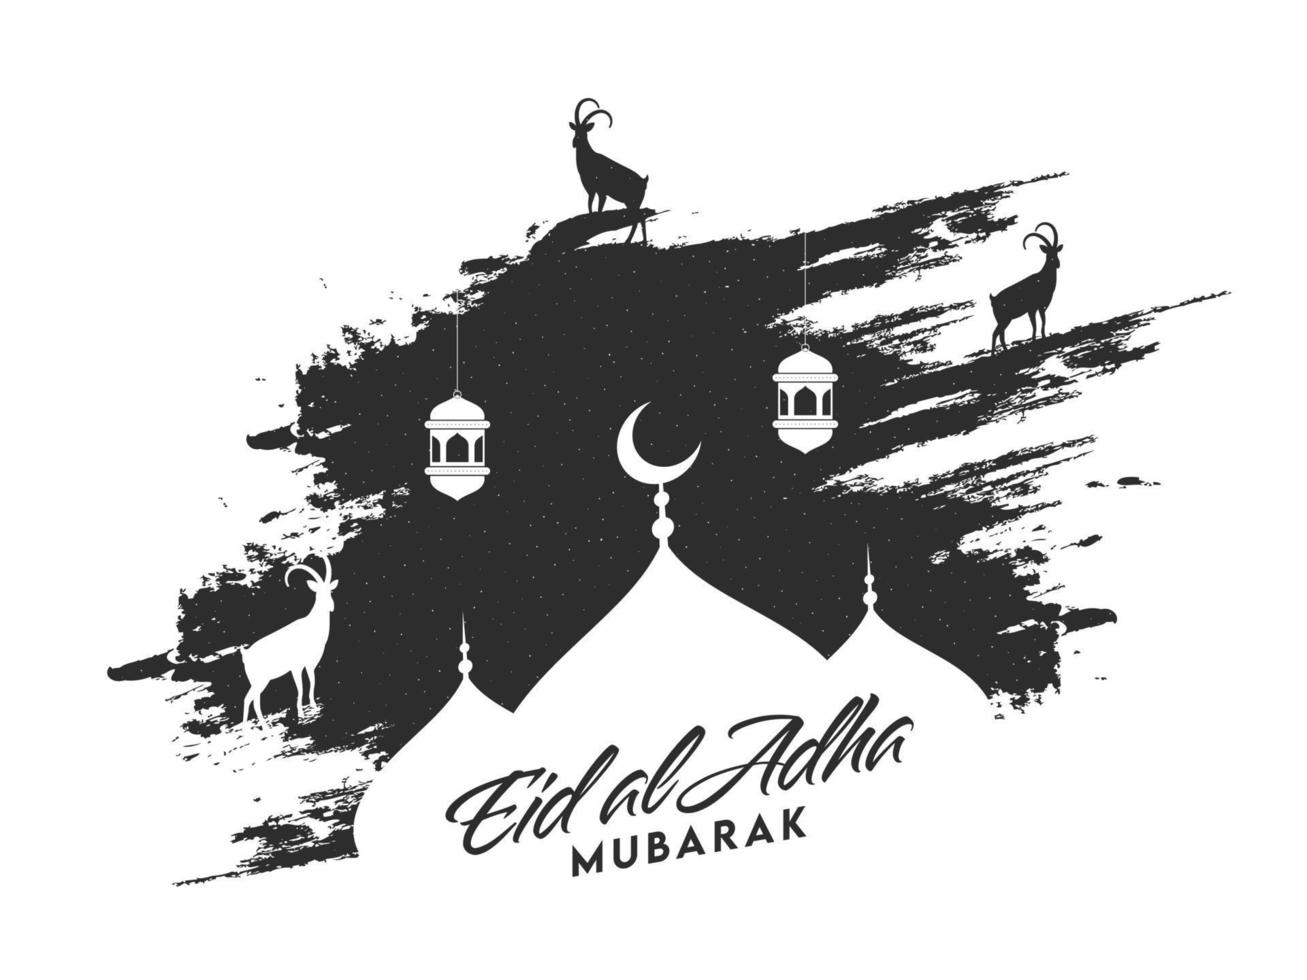 Eid-Al-Adha Mubarak Font with Silhouette Mosque, Goats, Hanging Lanterns and Black Brush Stroke Grunge on White Background. vector